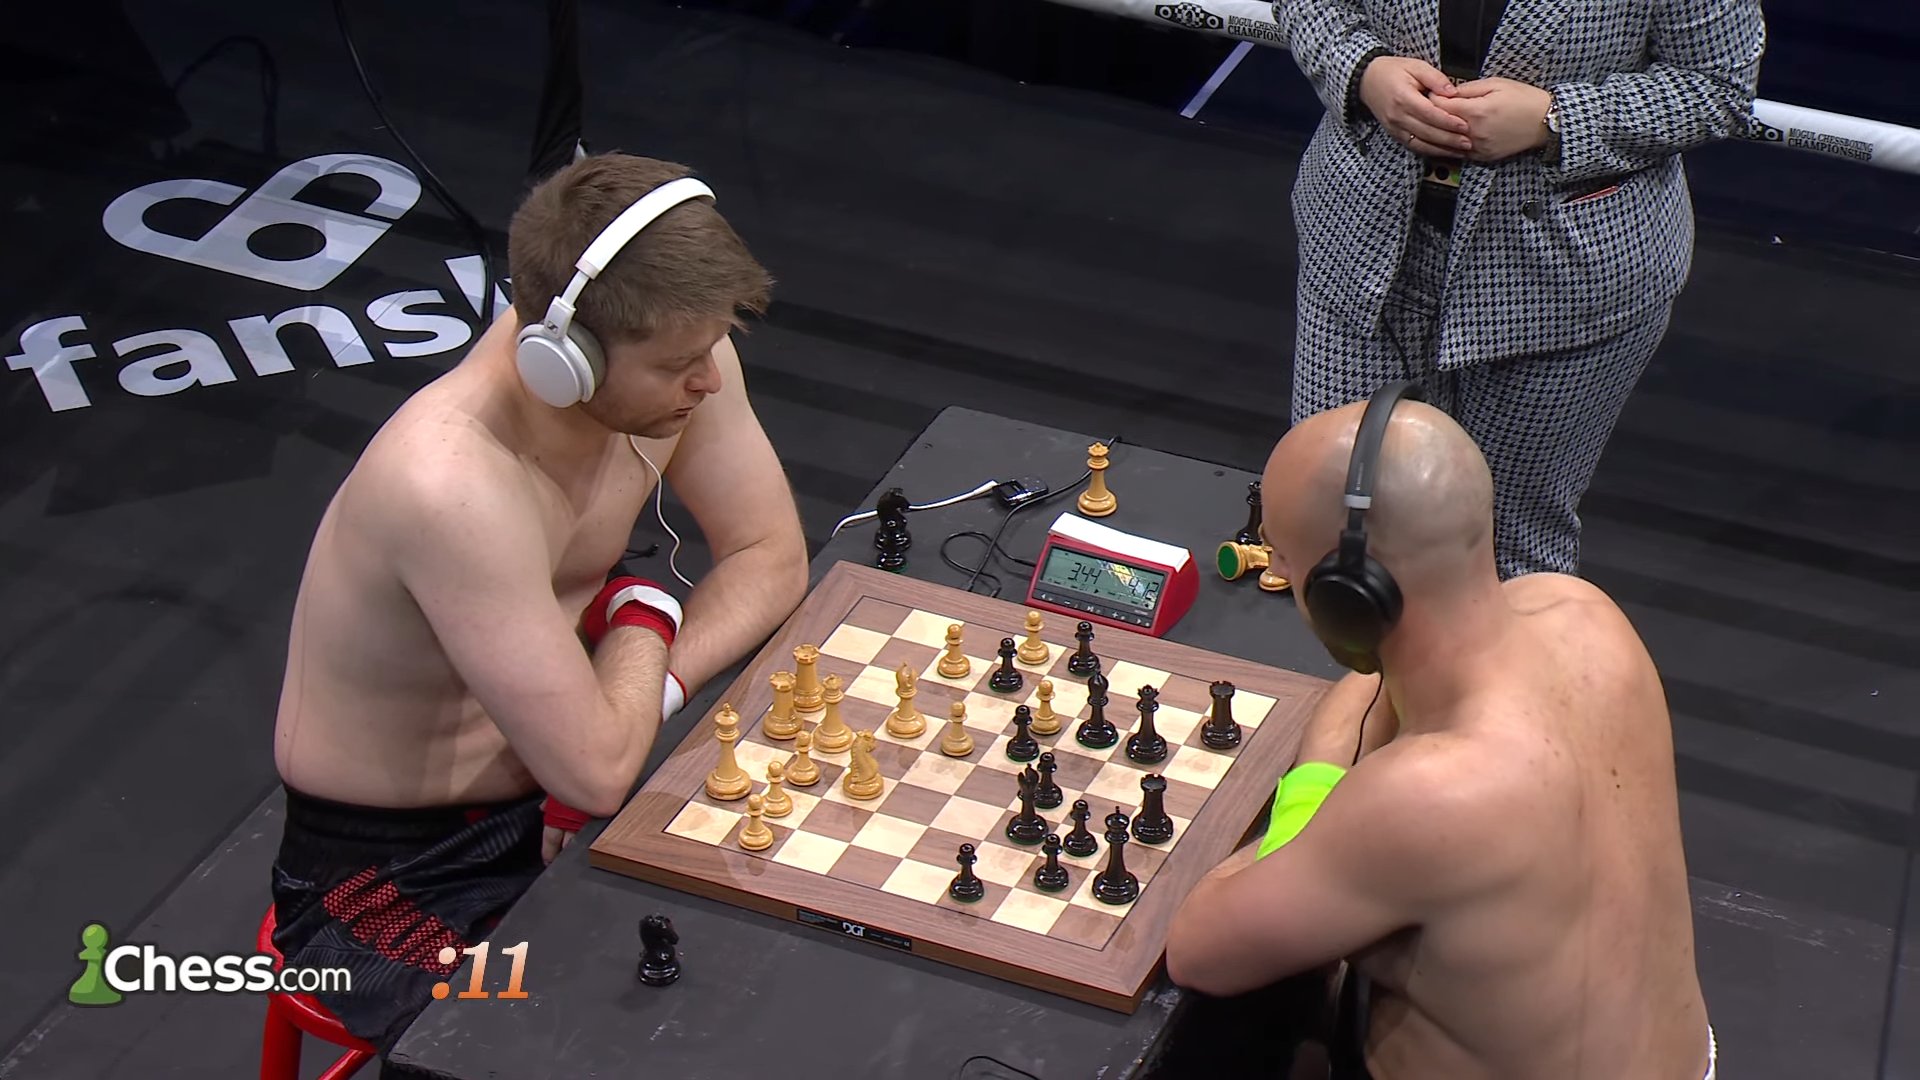 Mogul Moves on X: The highest rated chessboxing match of all time.   / X